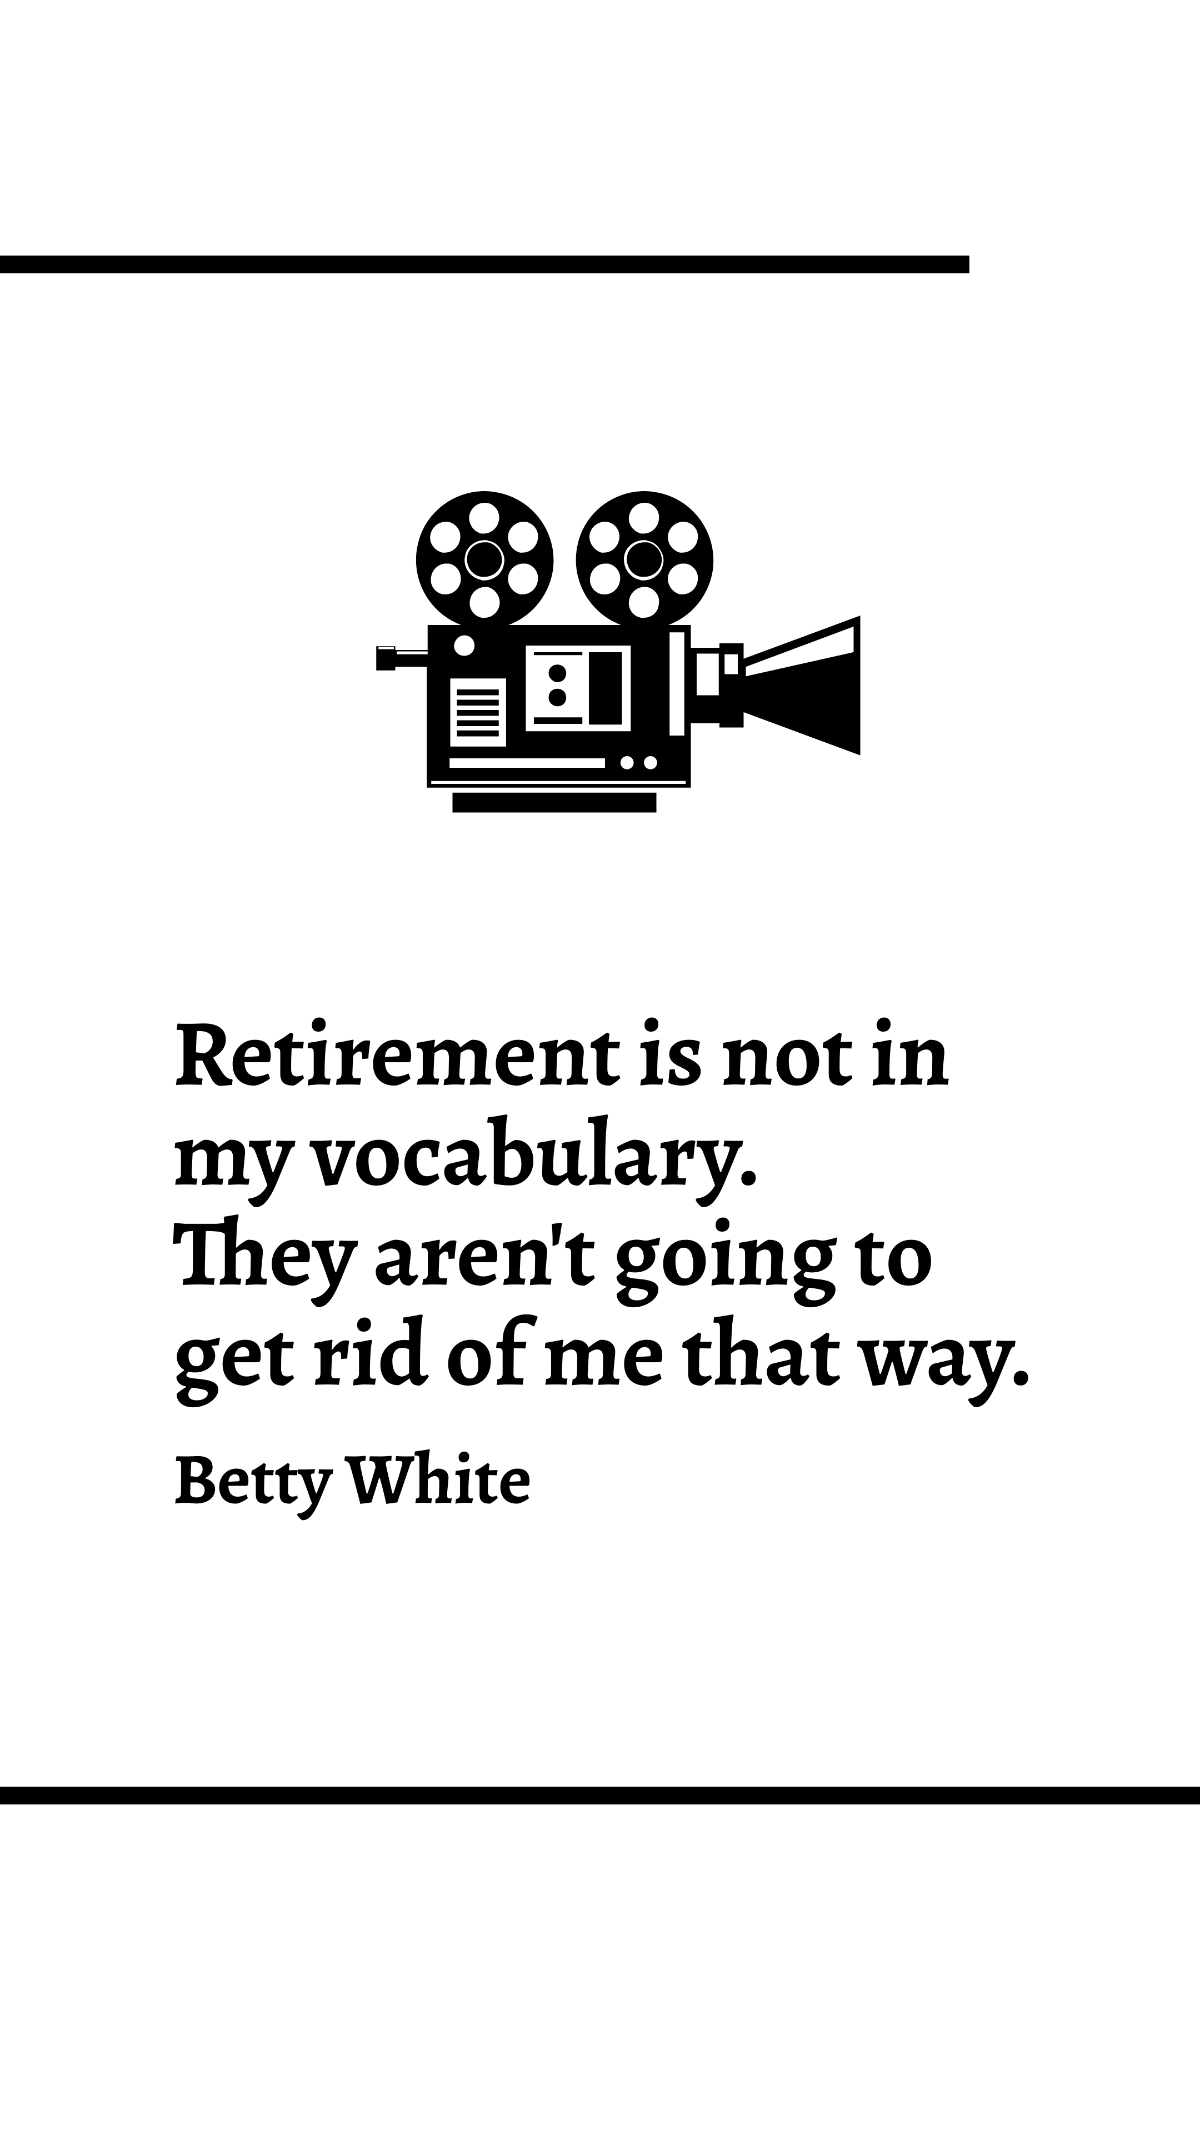 Betty White - Retirement is not in my vocabulary. They aren't going to get rid of me that way. Template